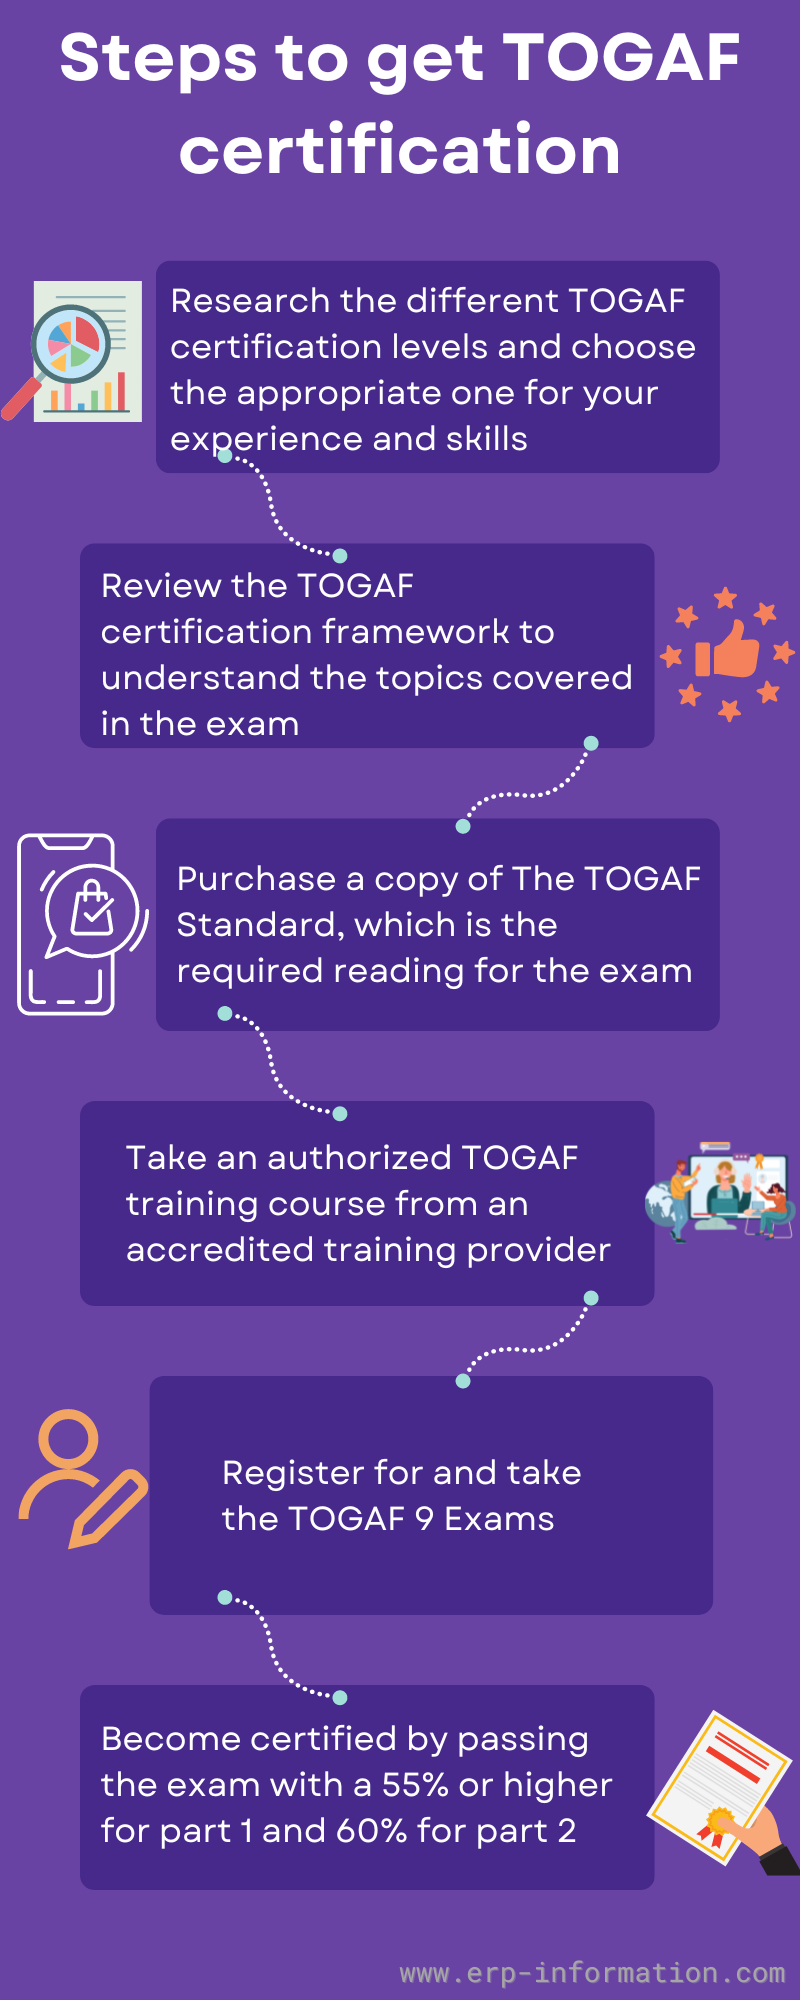 togaf-certification-cost-certification-types-exams-costs